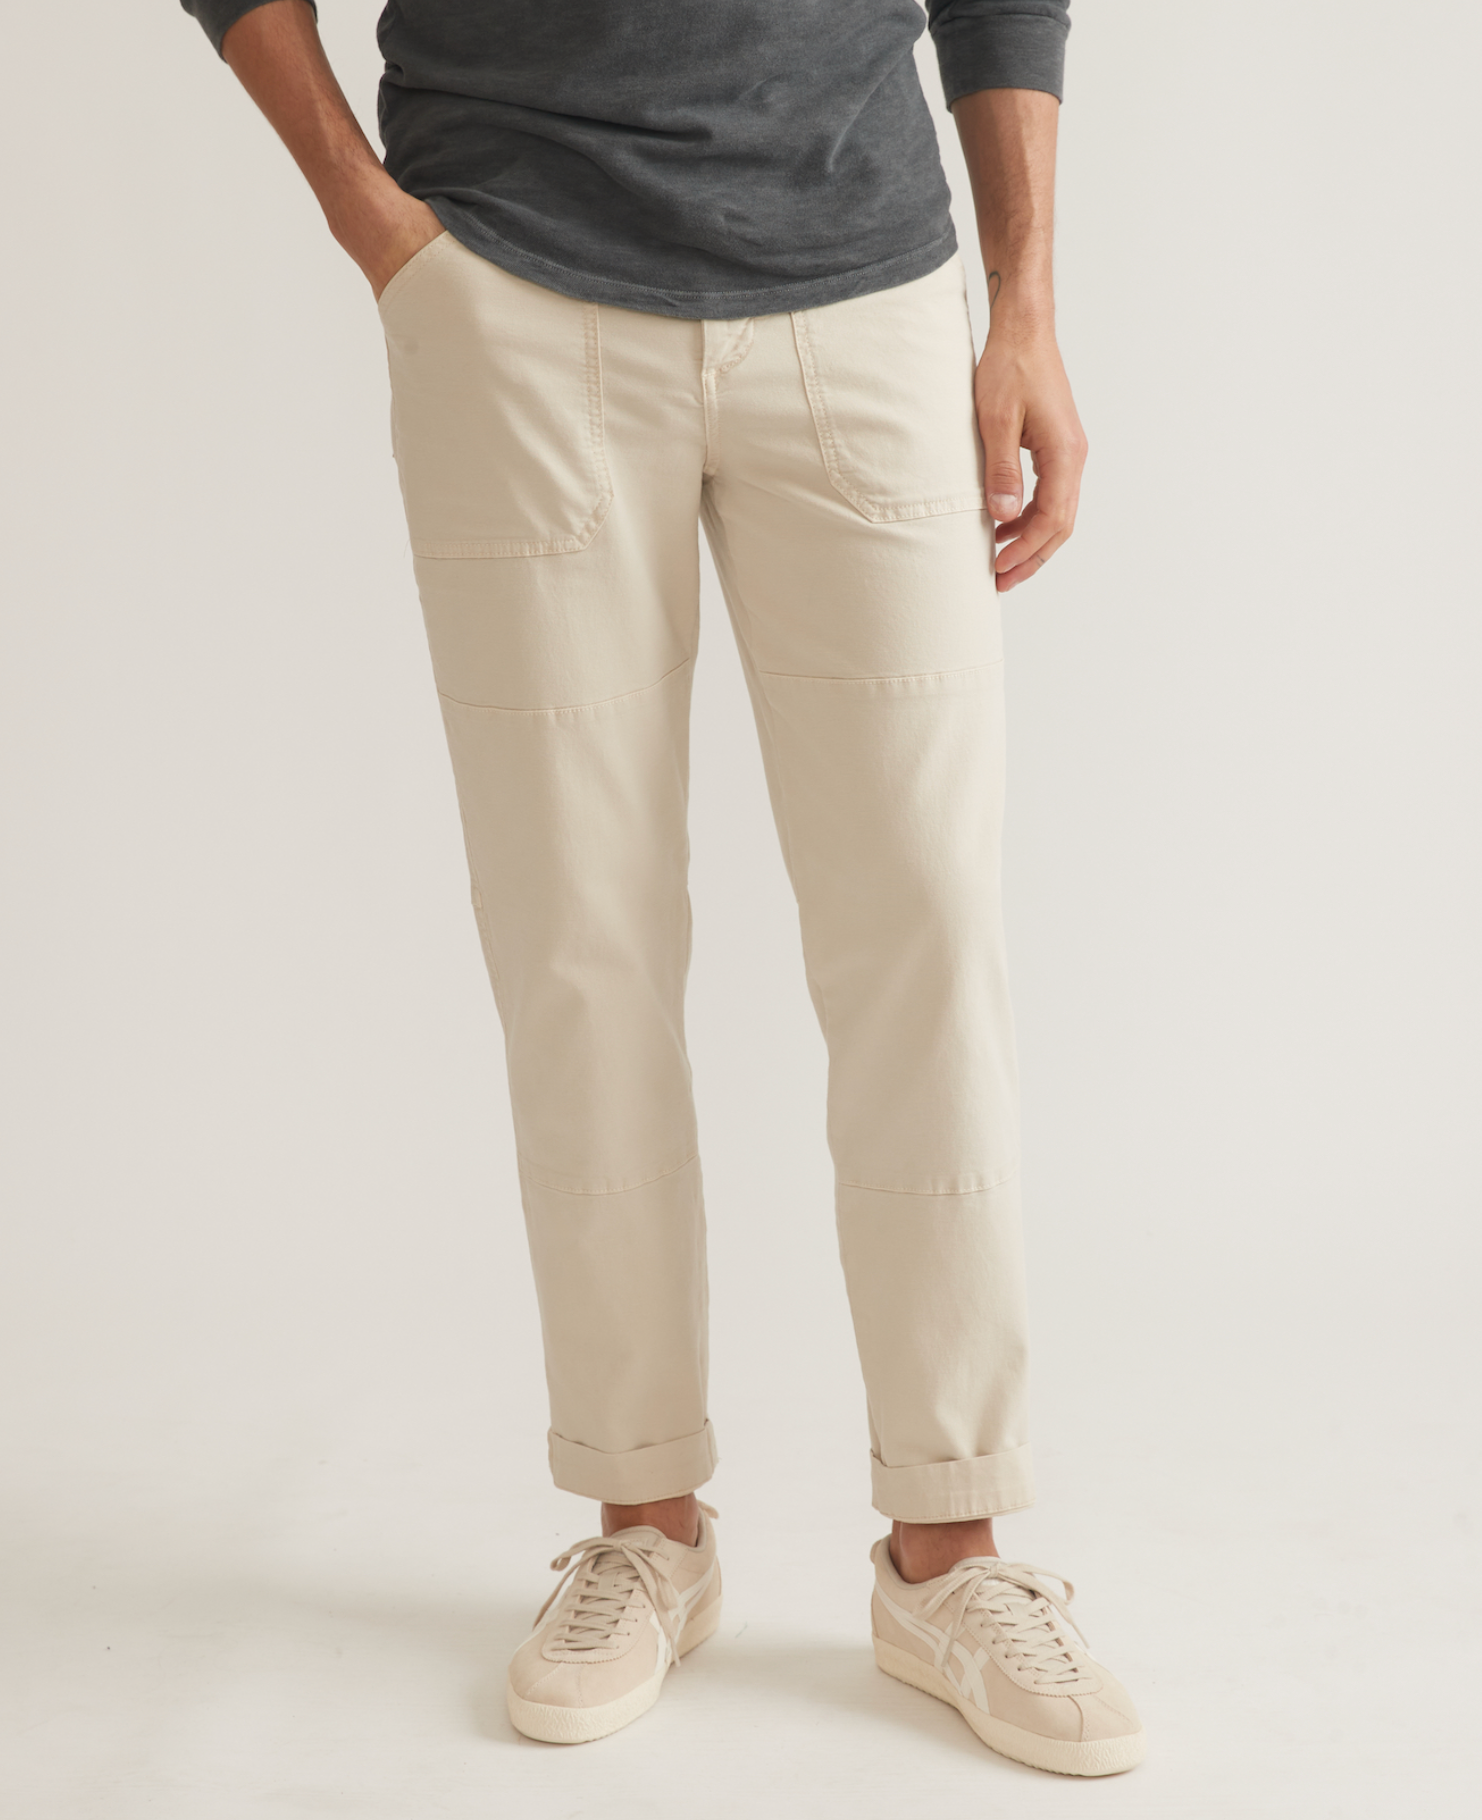 Marine Layer Breyer Utility Pant - Relaxed Fit